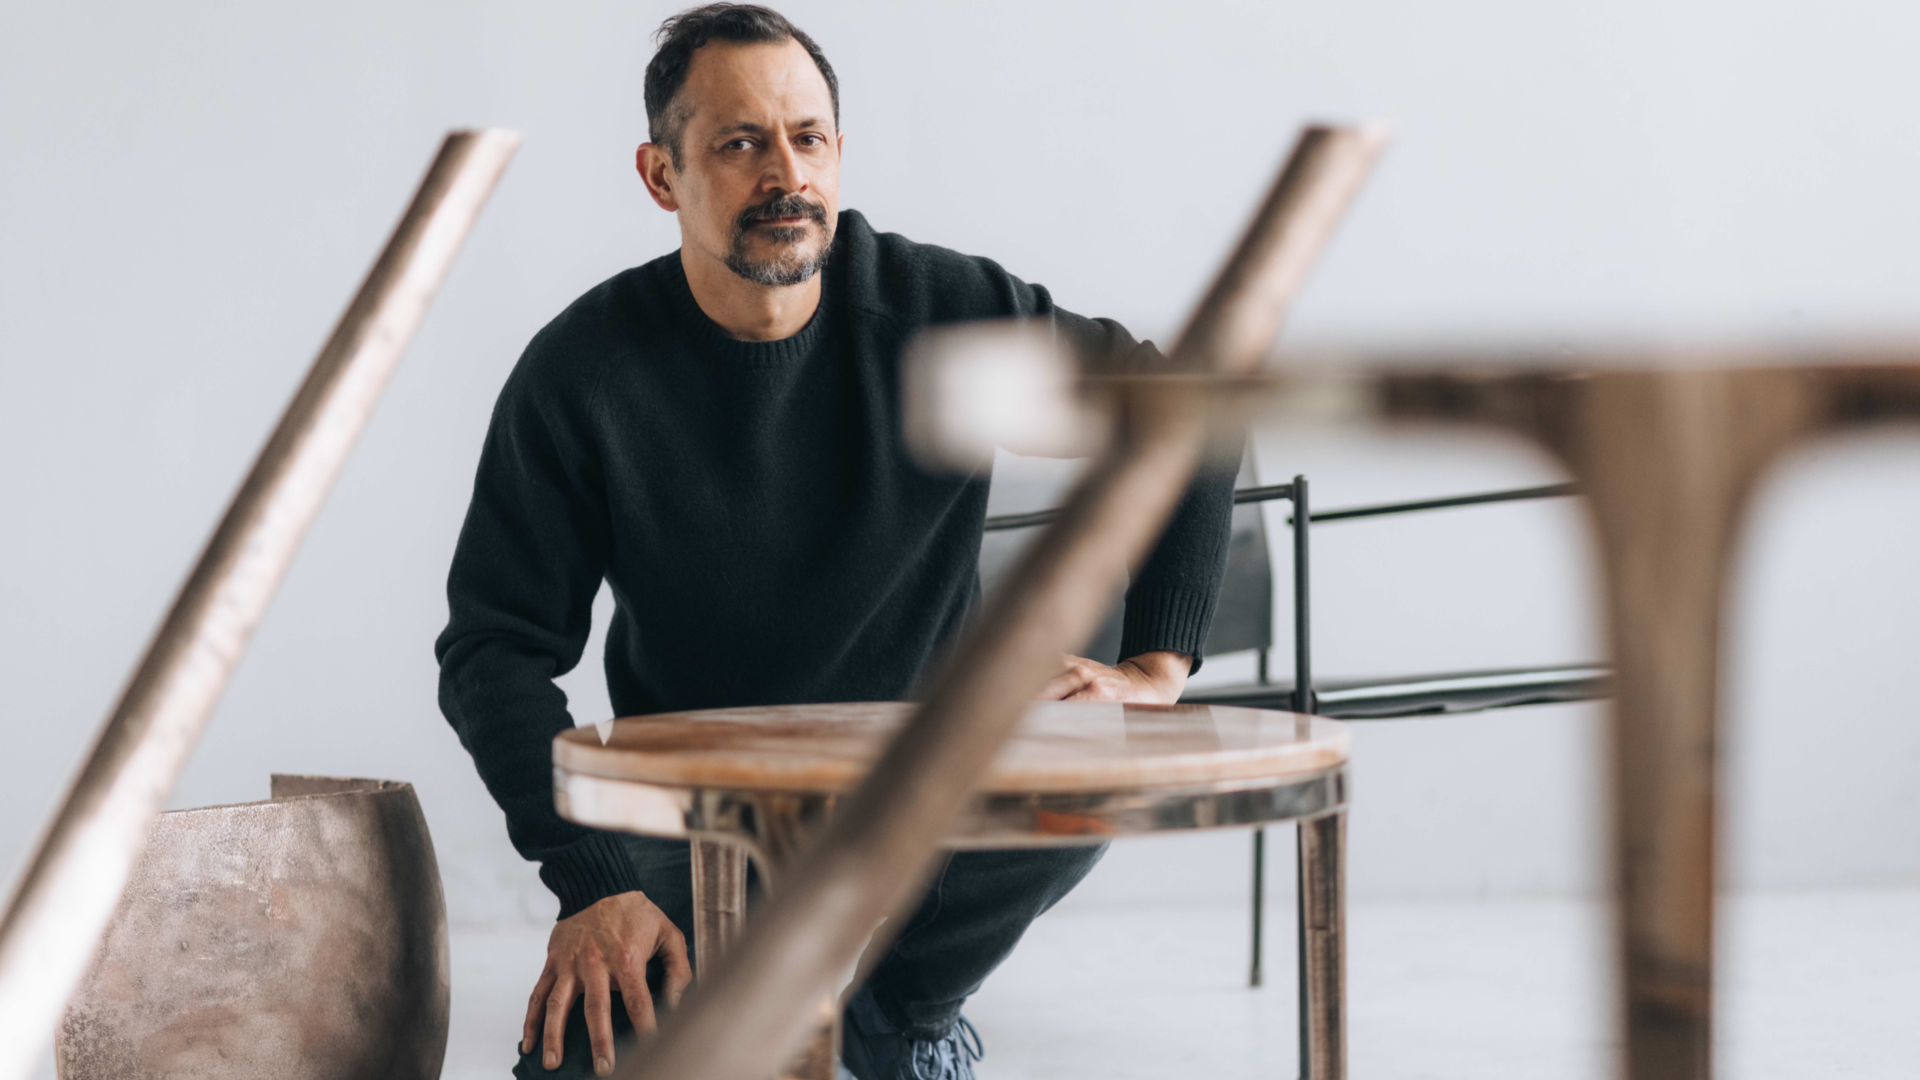 Designer Daniel Barbera kneeling in his studio surrounded by his own works including a bronze and marble s ide table and a leather dining chair